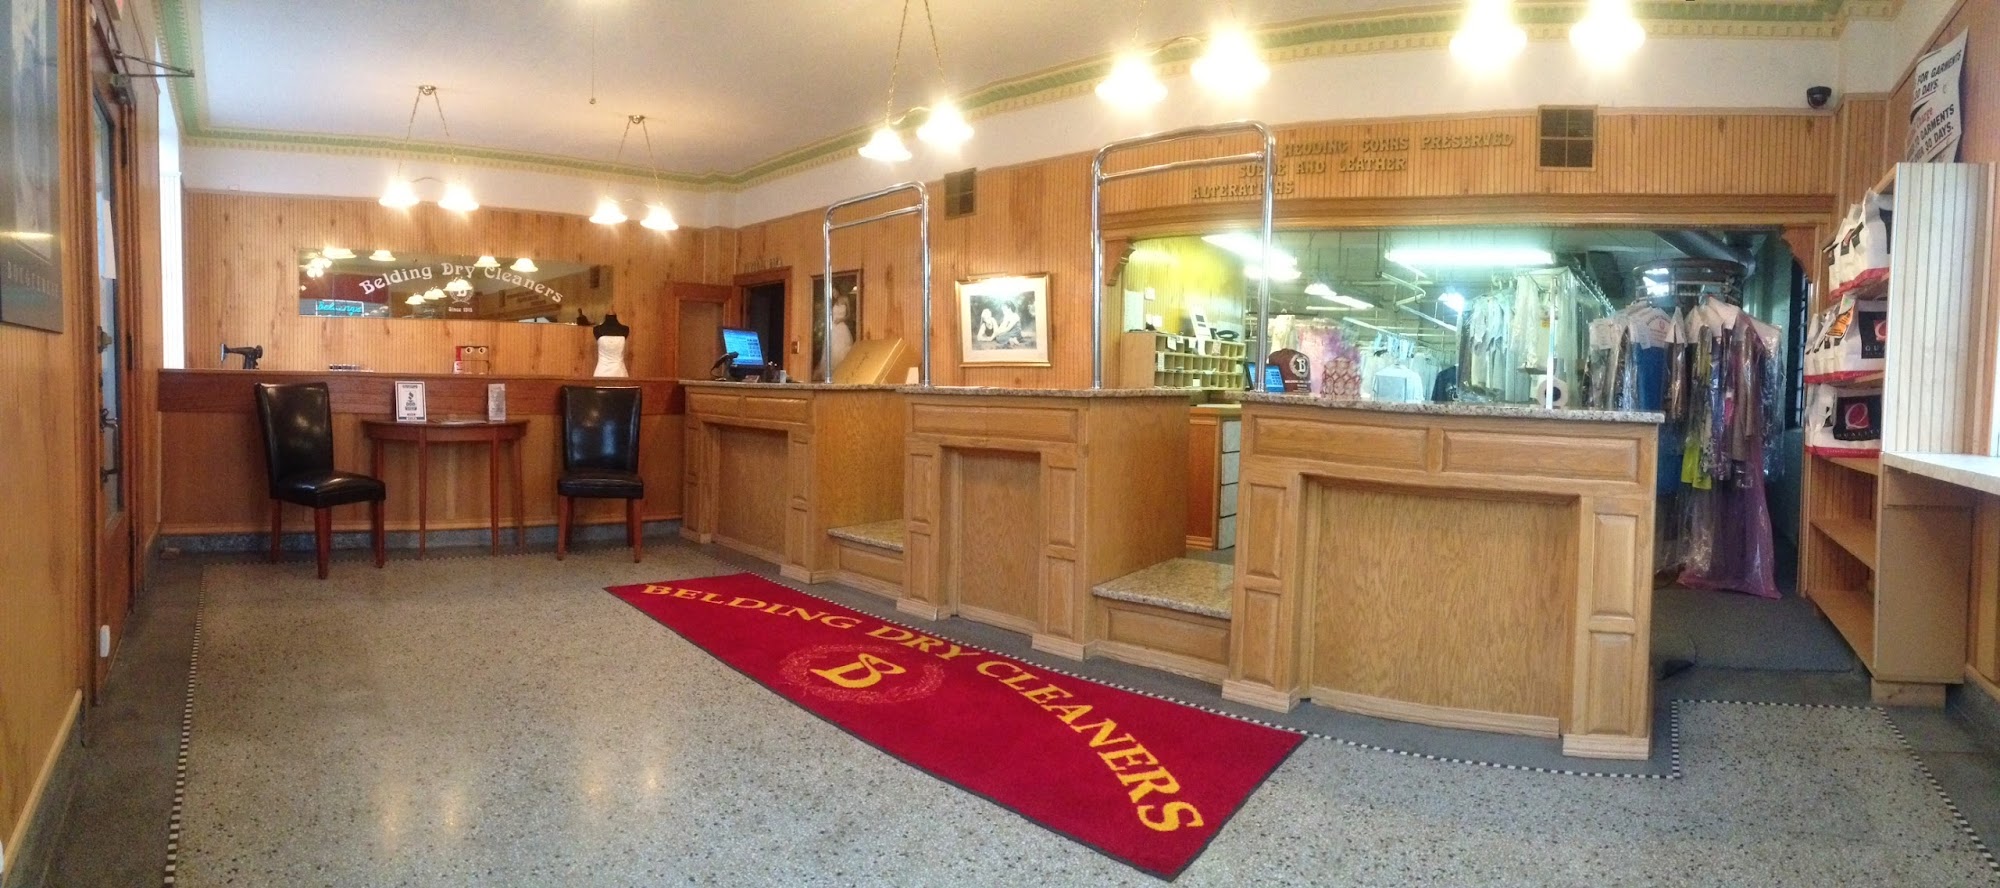 Belding Cleaners 15139 Kercheval Ave, Grosse Pointe Park Michigan 48230